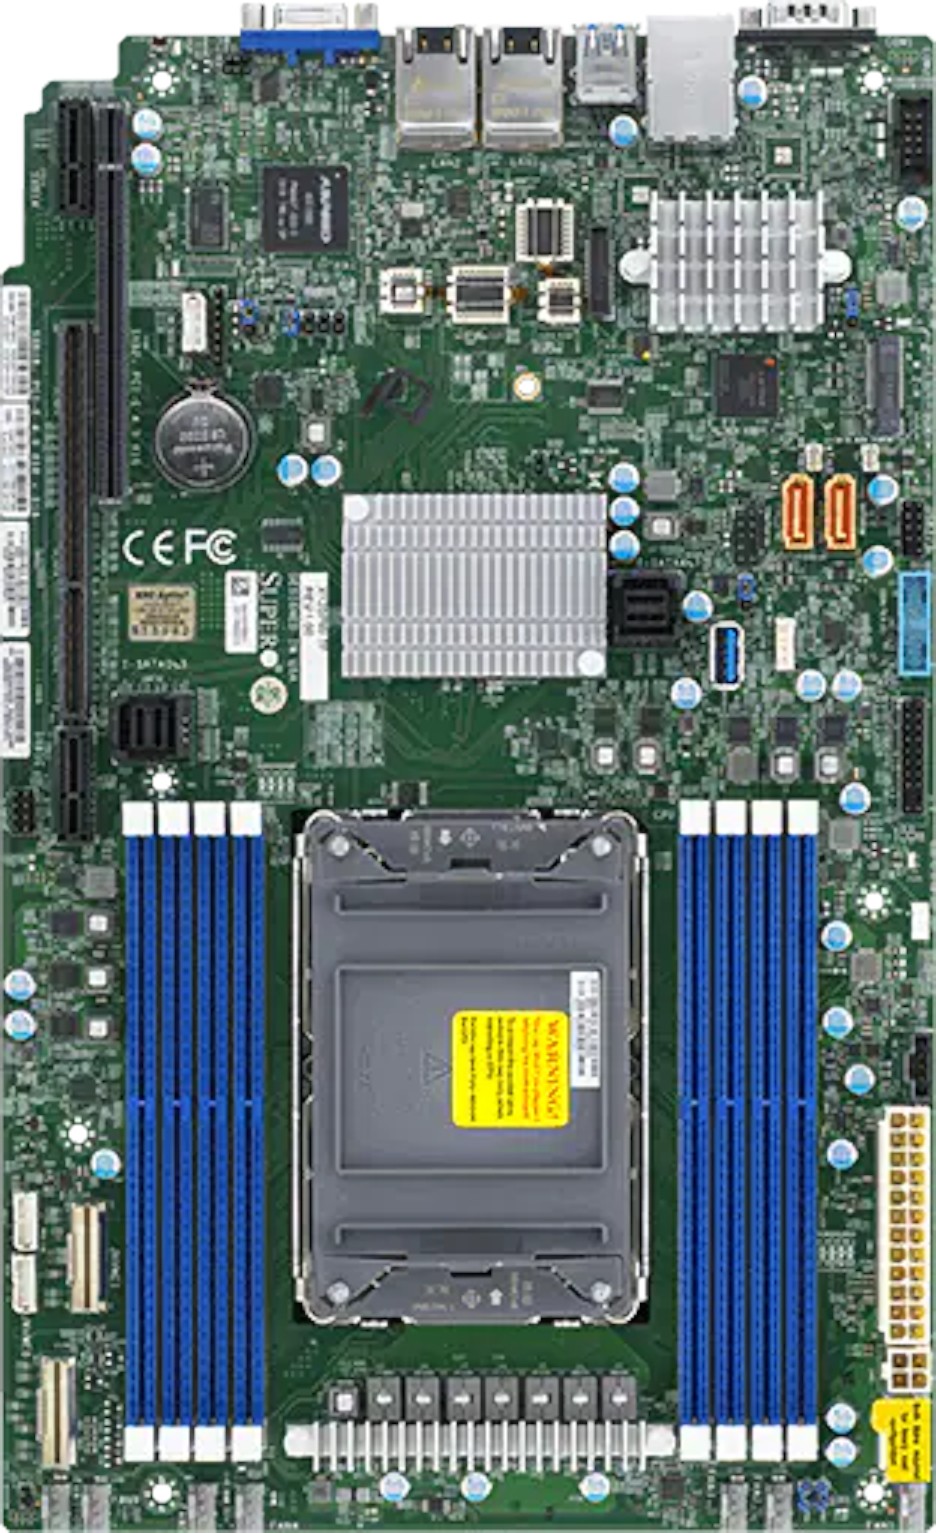 Motherboard for Supermicro SYS-110P SYS-E403 SYS-520P Intel LGA4189 X12SPW-TF-001